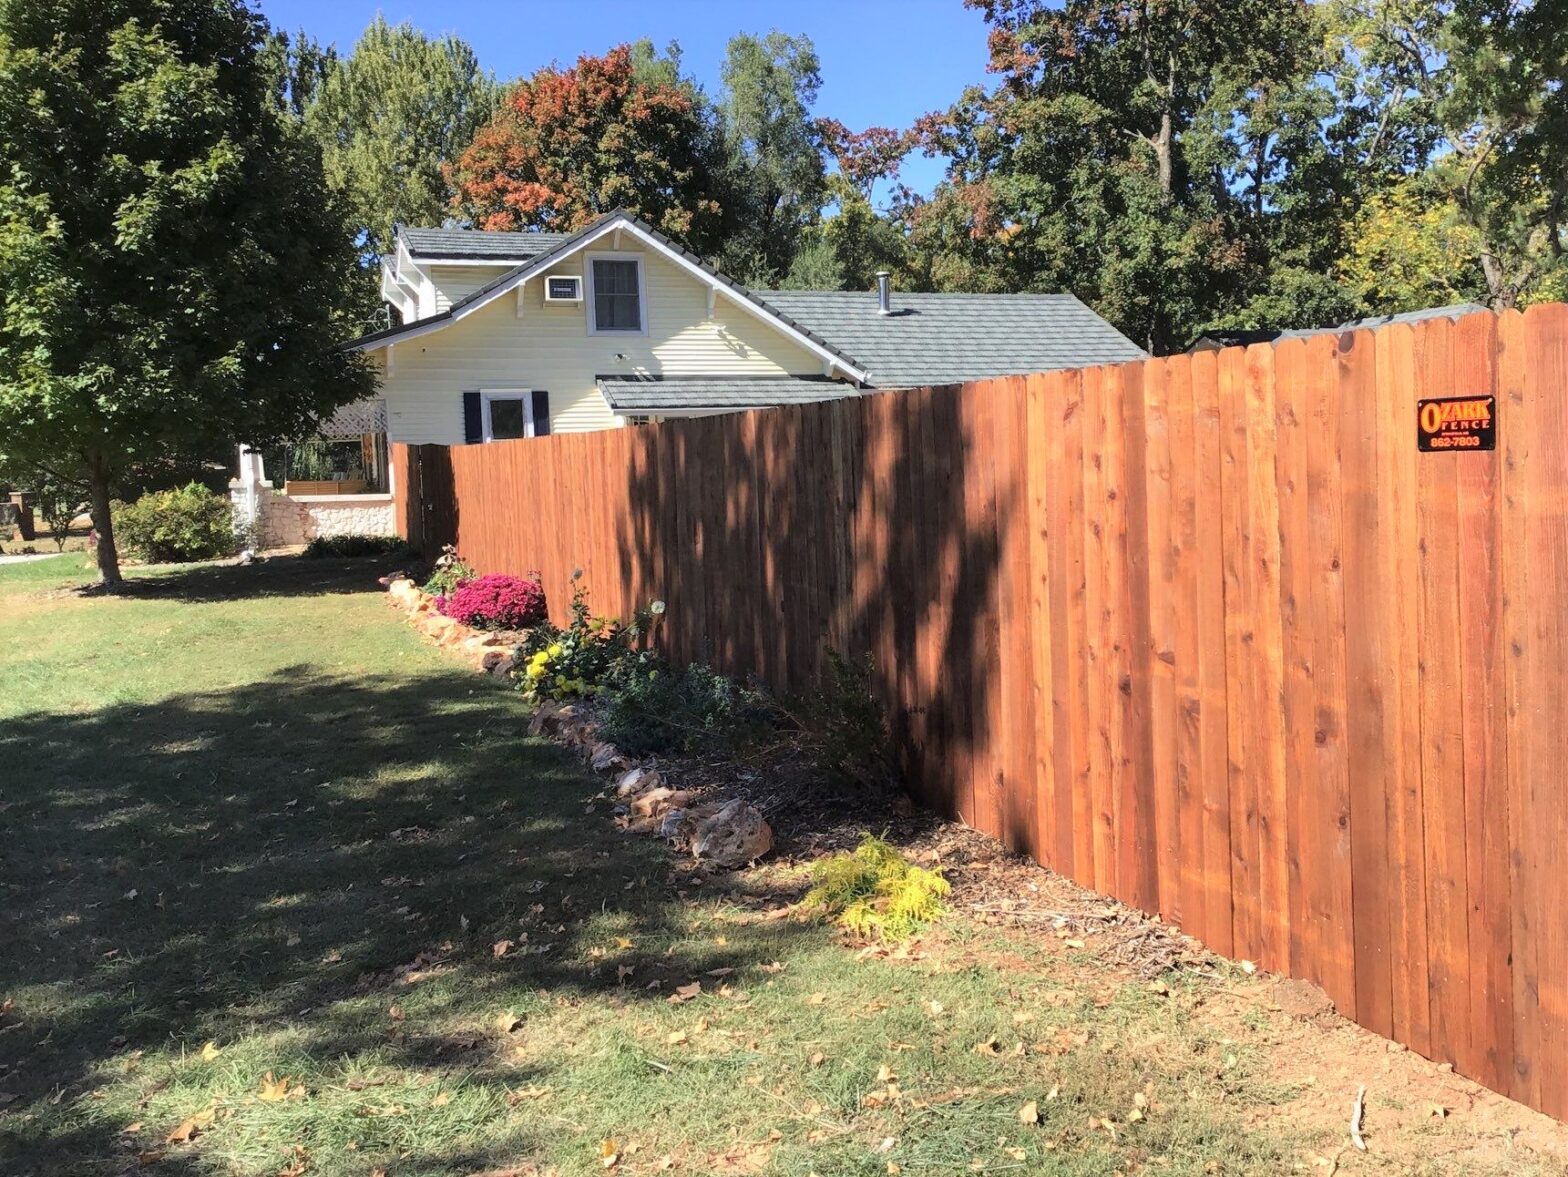 Photo of a wood fence in Springfield, Missouri by Ozark Fence